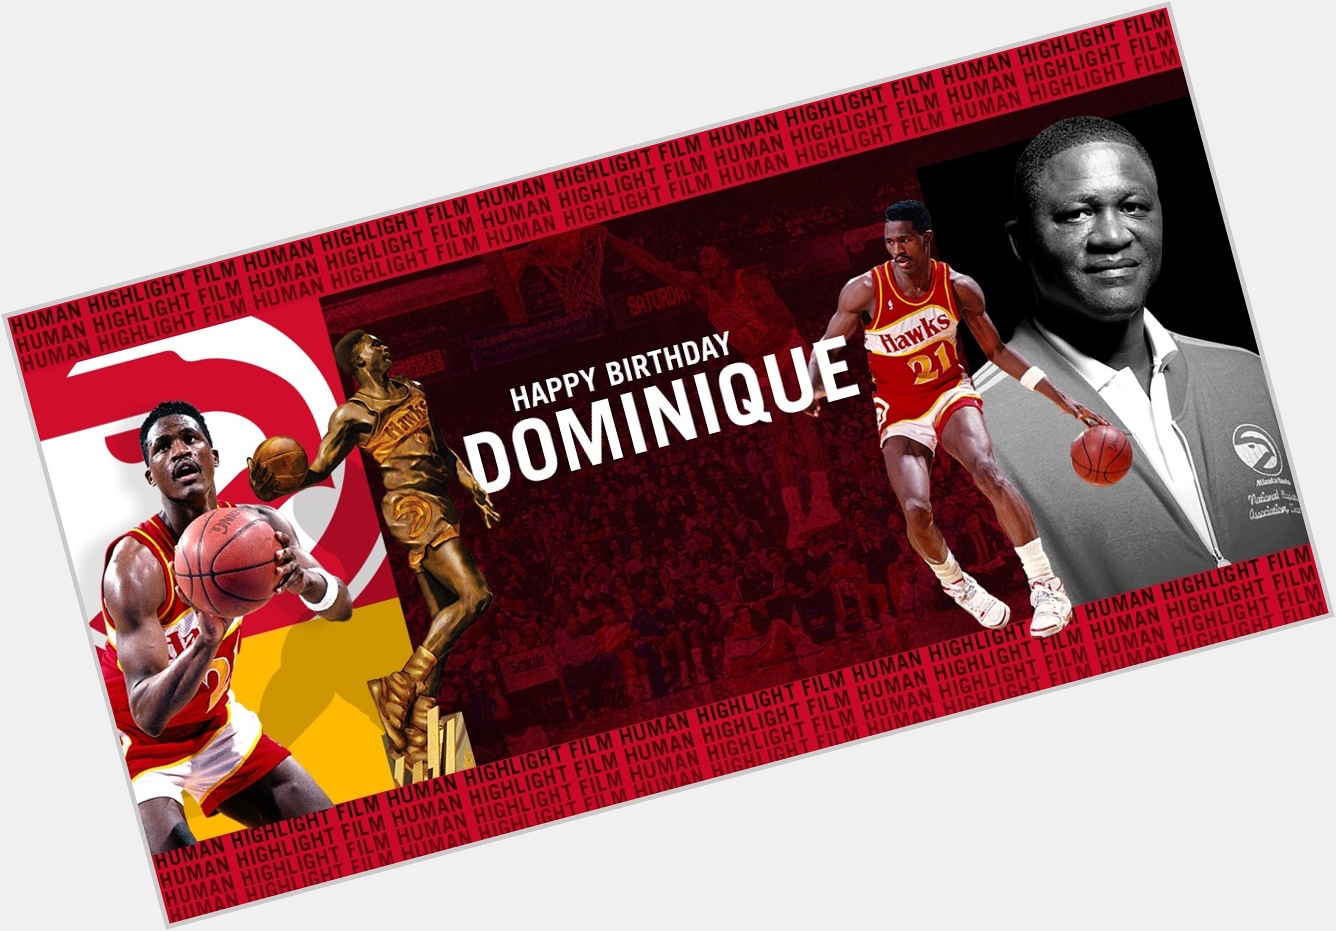 Join us in wishing Dominique Wilkins ( aka The Human Highlight Film, a very HAPPY BIRTHDAY!  